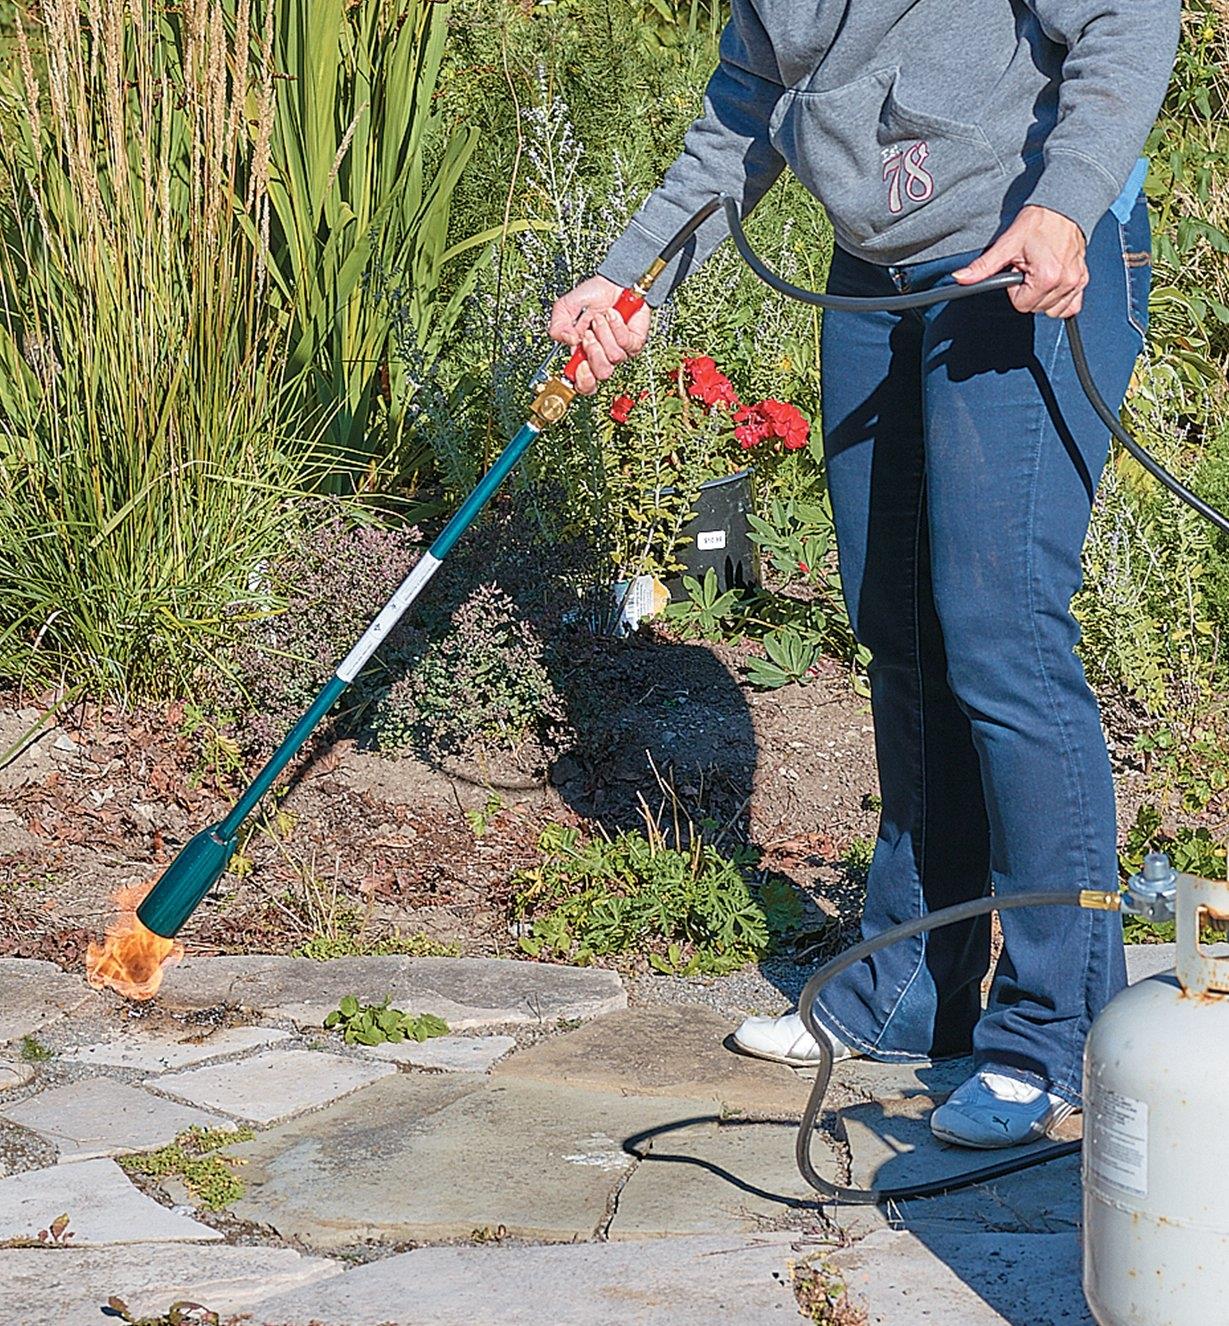 A woman uses the Giant Weed Torch to remove weeds from a walkway